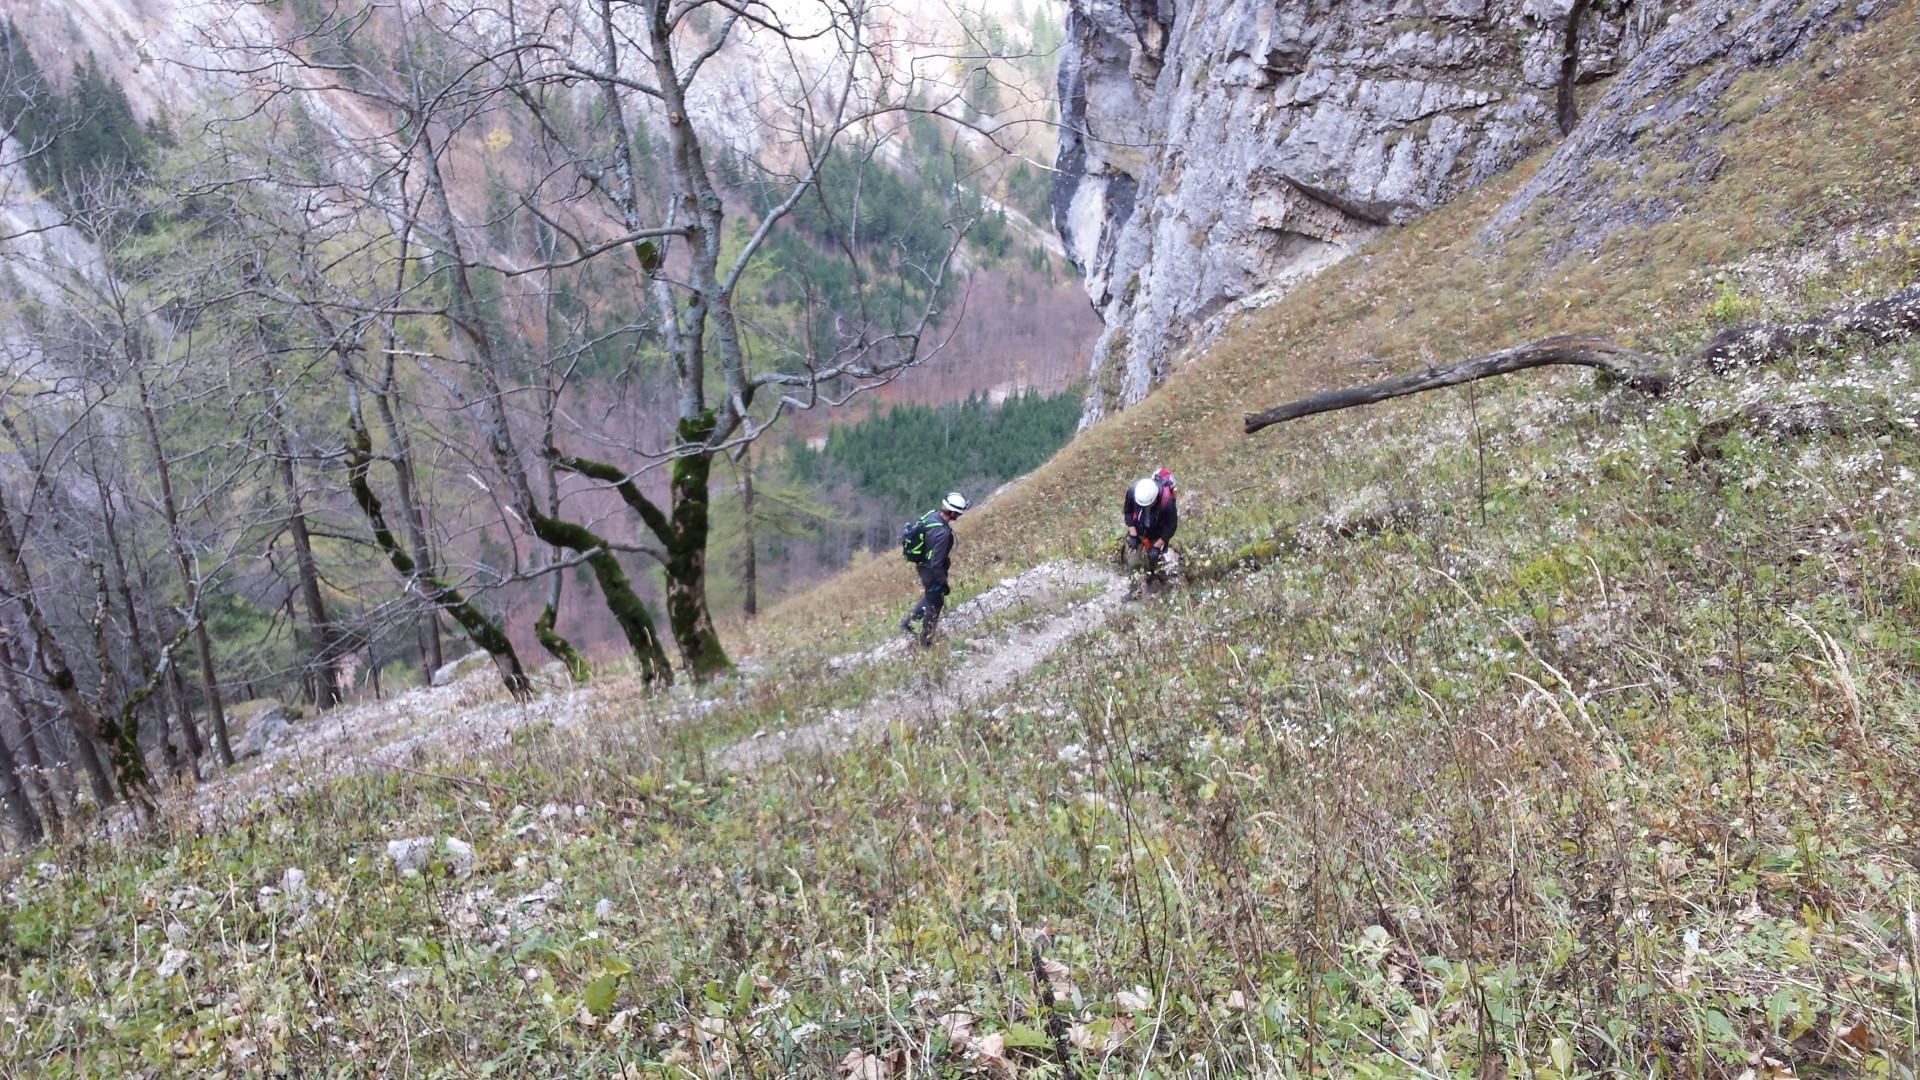 Hannes and Stefan on the trail